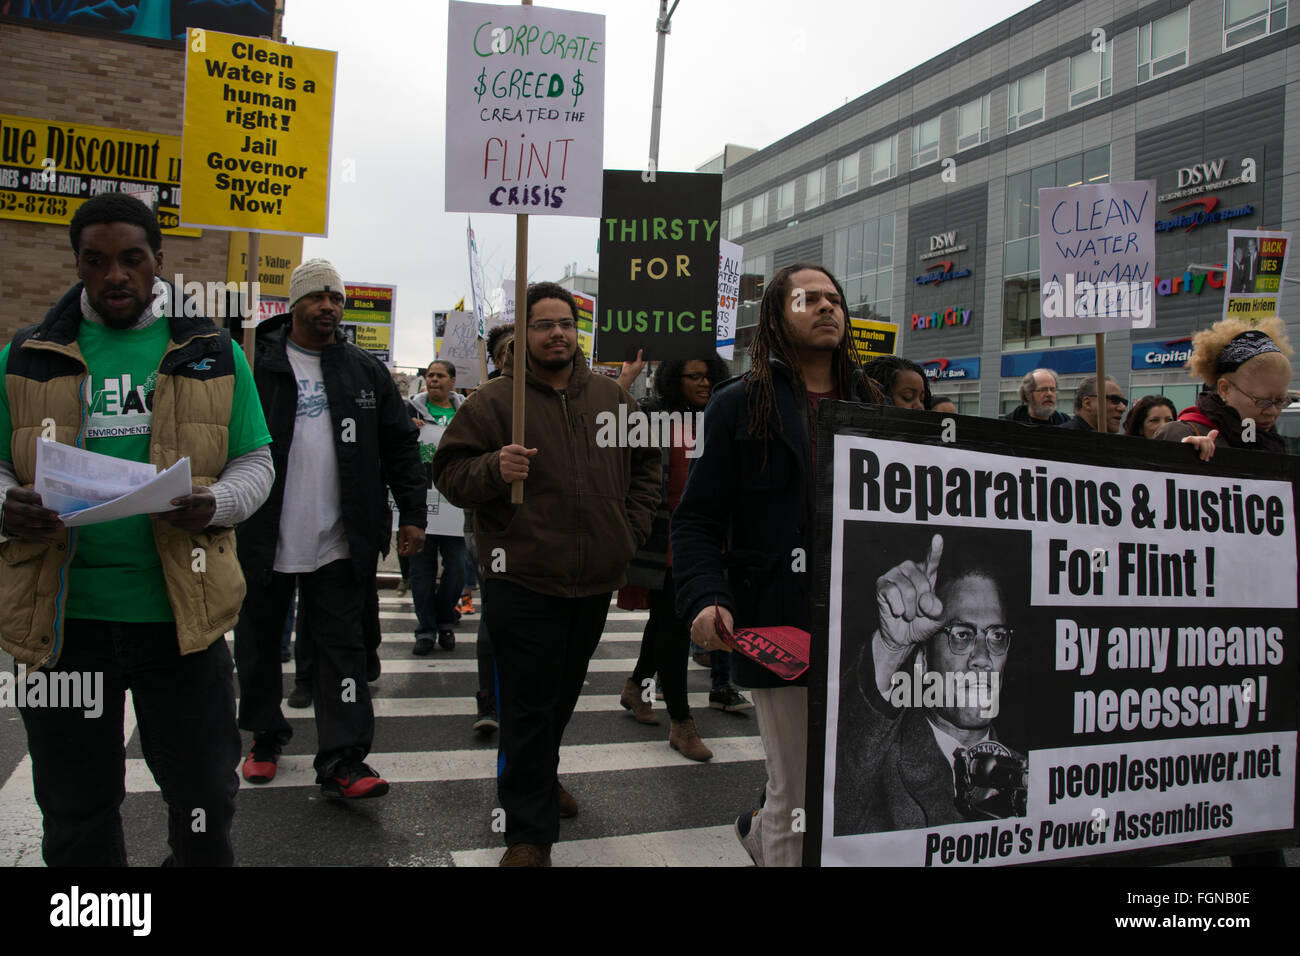 Harlem, New York, USA. 21st February 2016. Social and environmental justice activists march through Harlem after a solidarity rally for Flint, Michigan at the Adam Clayton Powell Jr. State Office Building on the 51st anniversary of the assassination of Malcolm X. Stock Photo